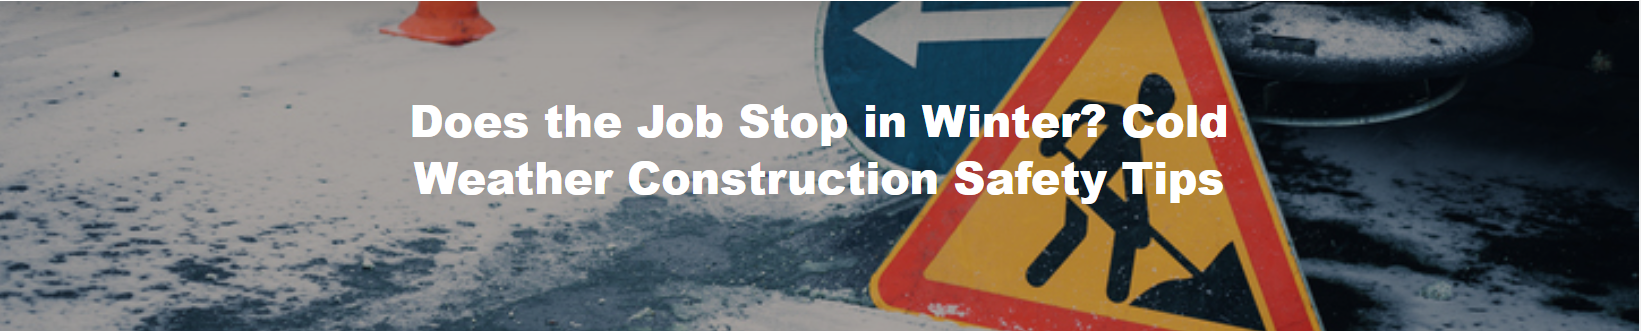 Does the Job Stop in Winter? Cold Weather Construction Safety Tips